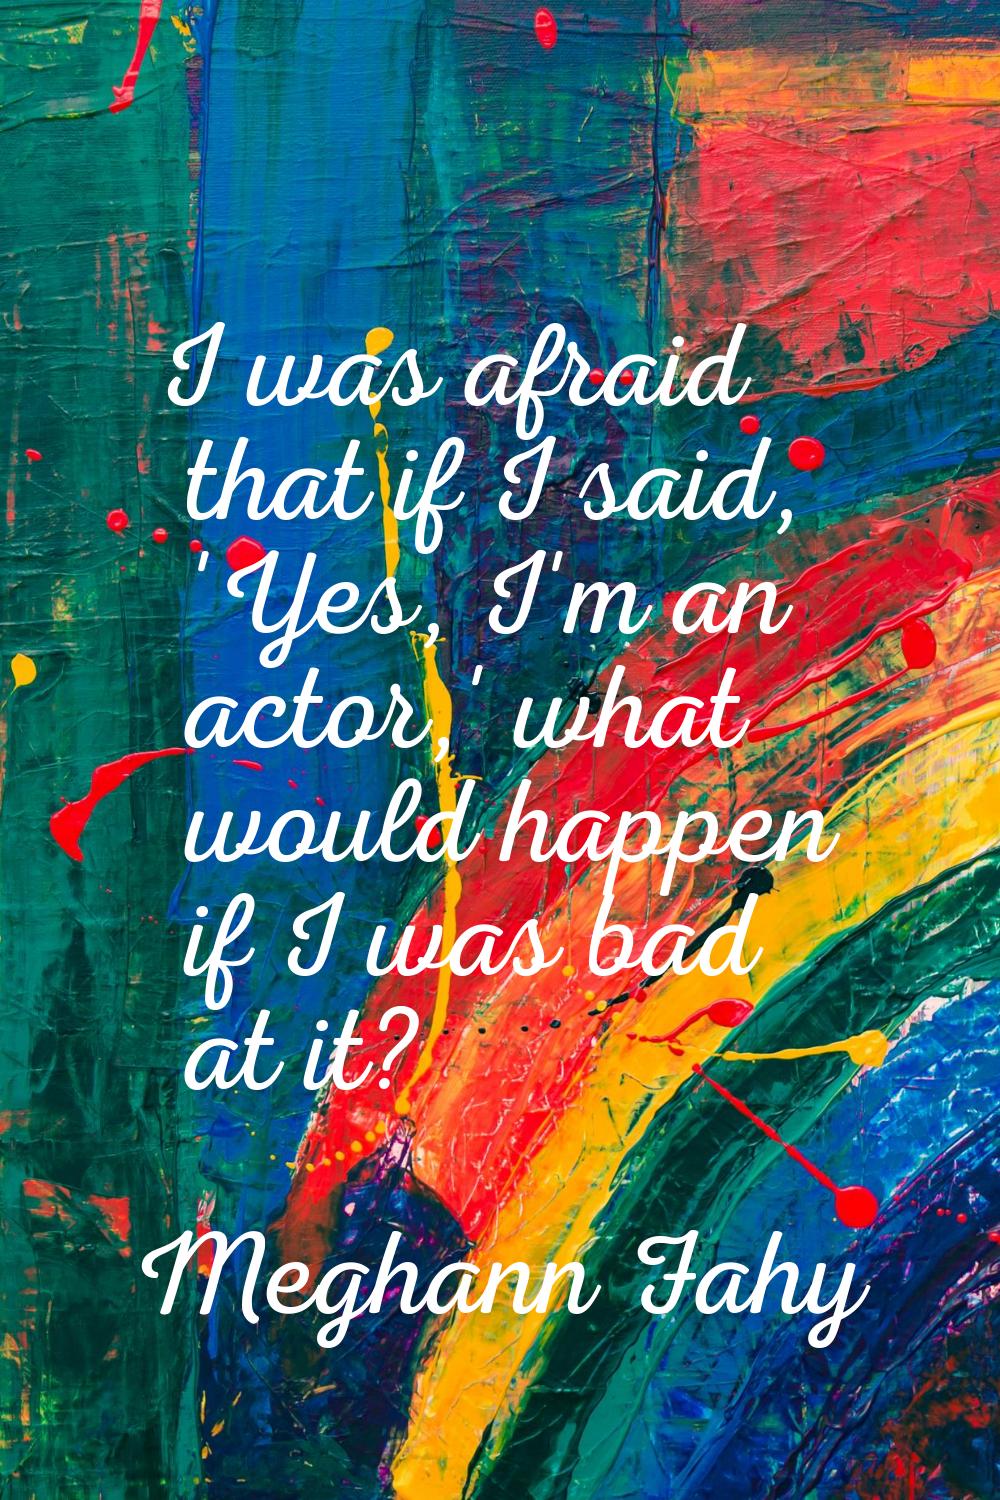 I was afraid that if I said, 'Yes, I'm an actor,' what would happen if I was bad at it?